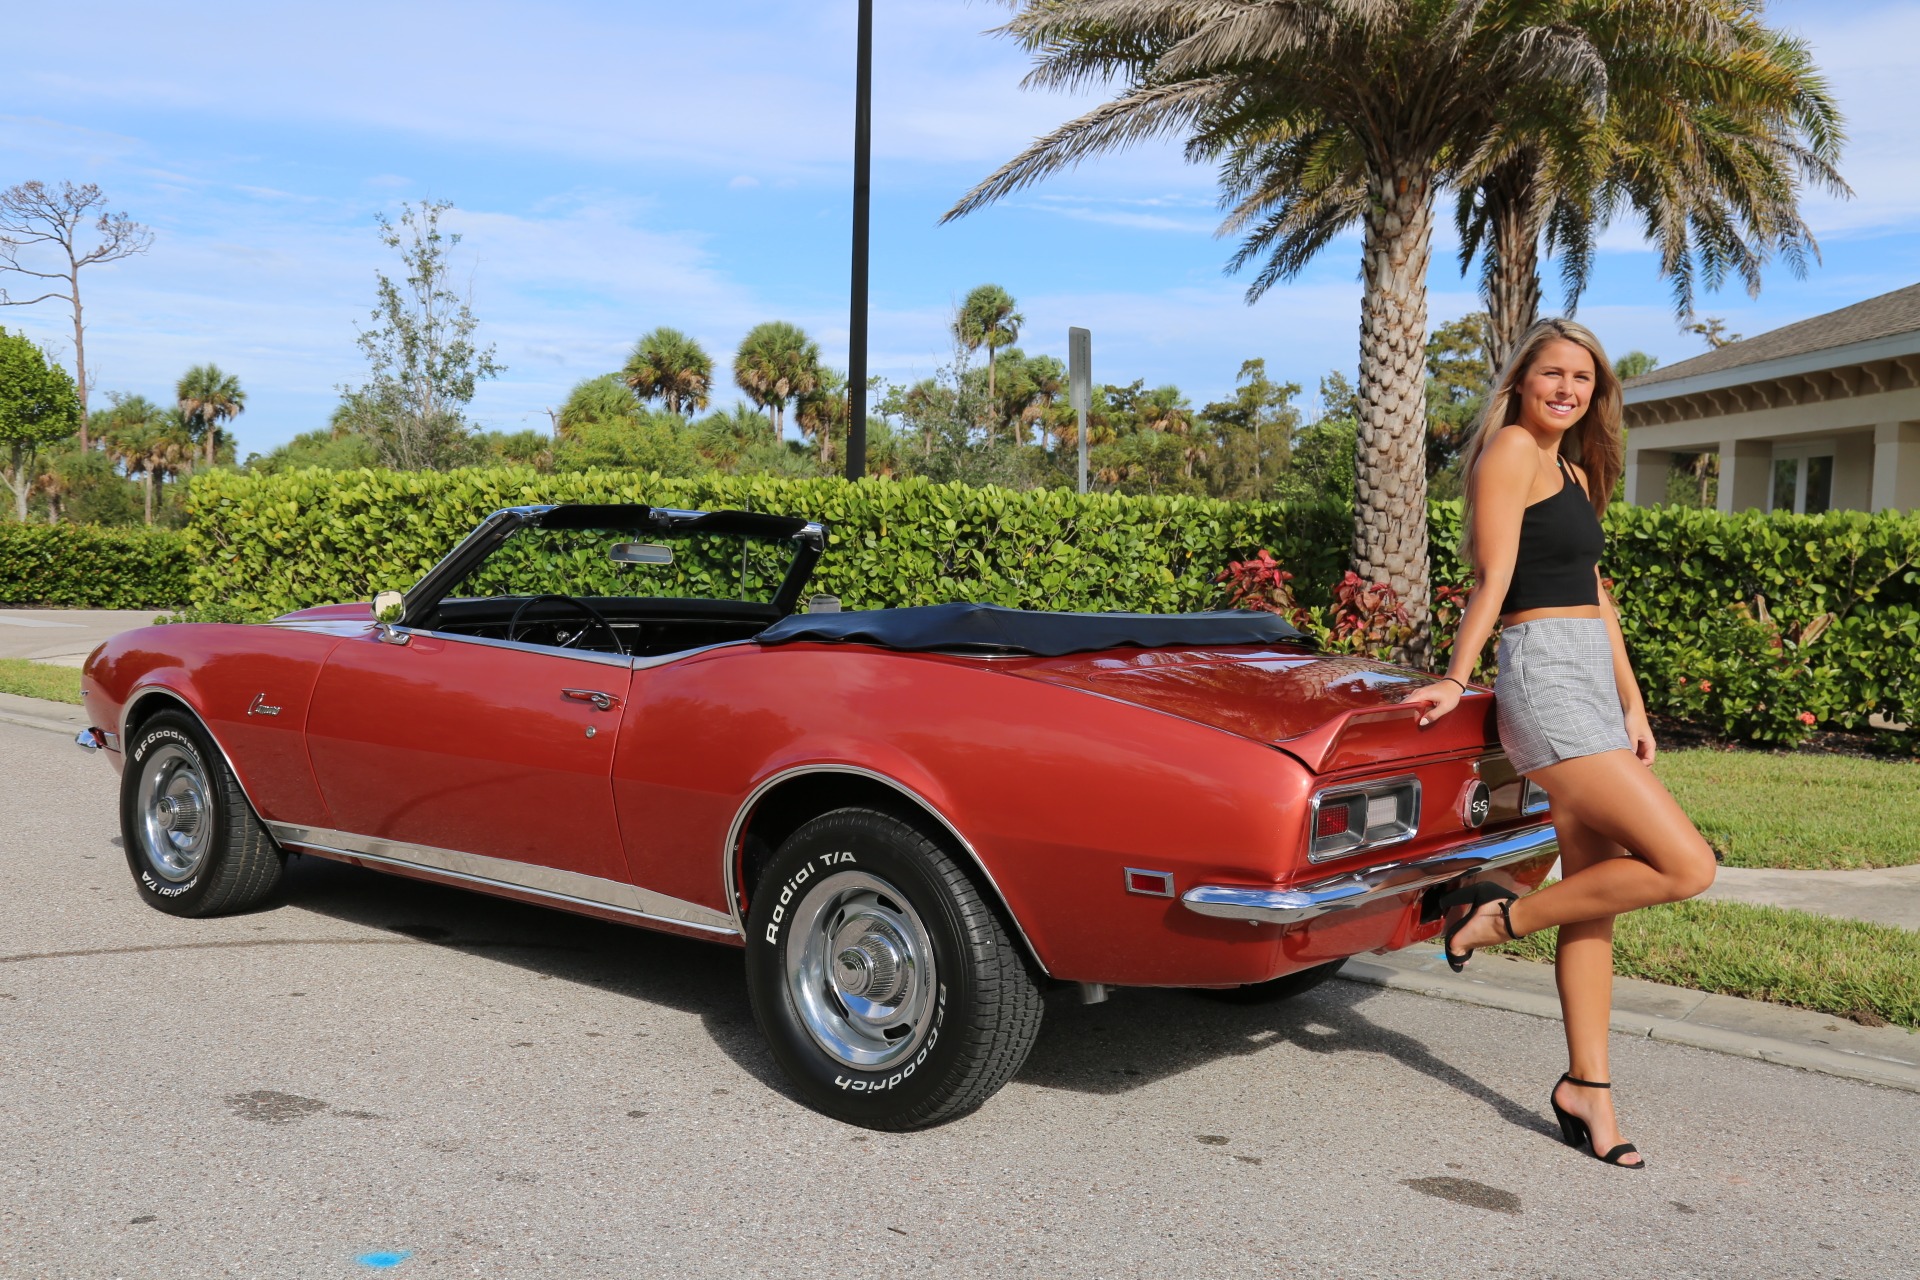 Used 1968 Chevy Camaro Convertible V8 Auto for sale Sold at Muscle Cars for Sale Inc. in Fort Myers FL 33912 2